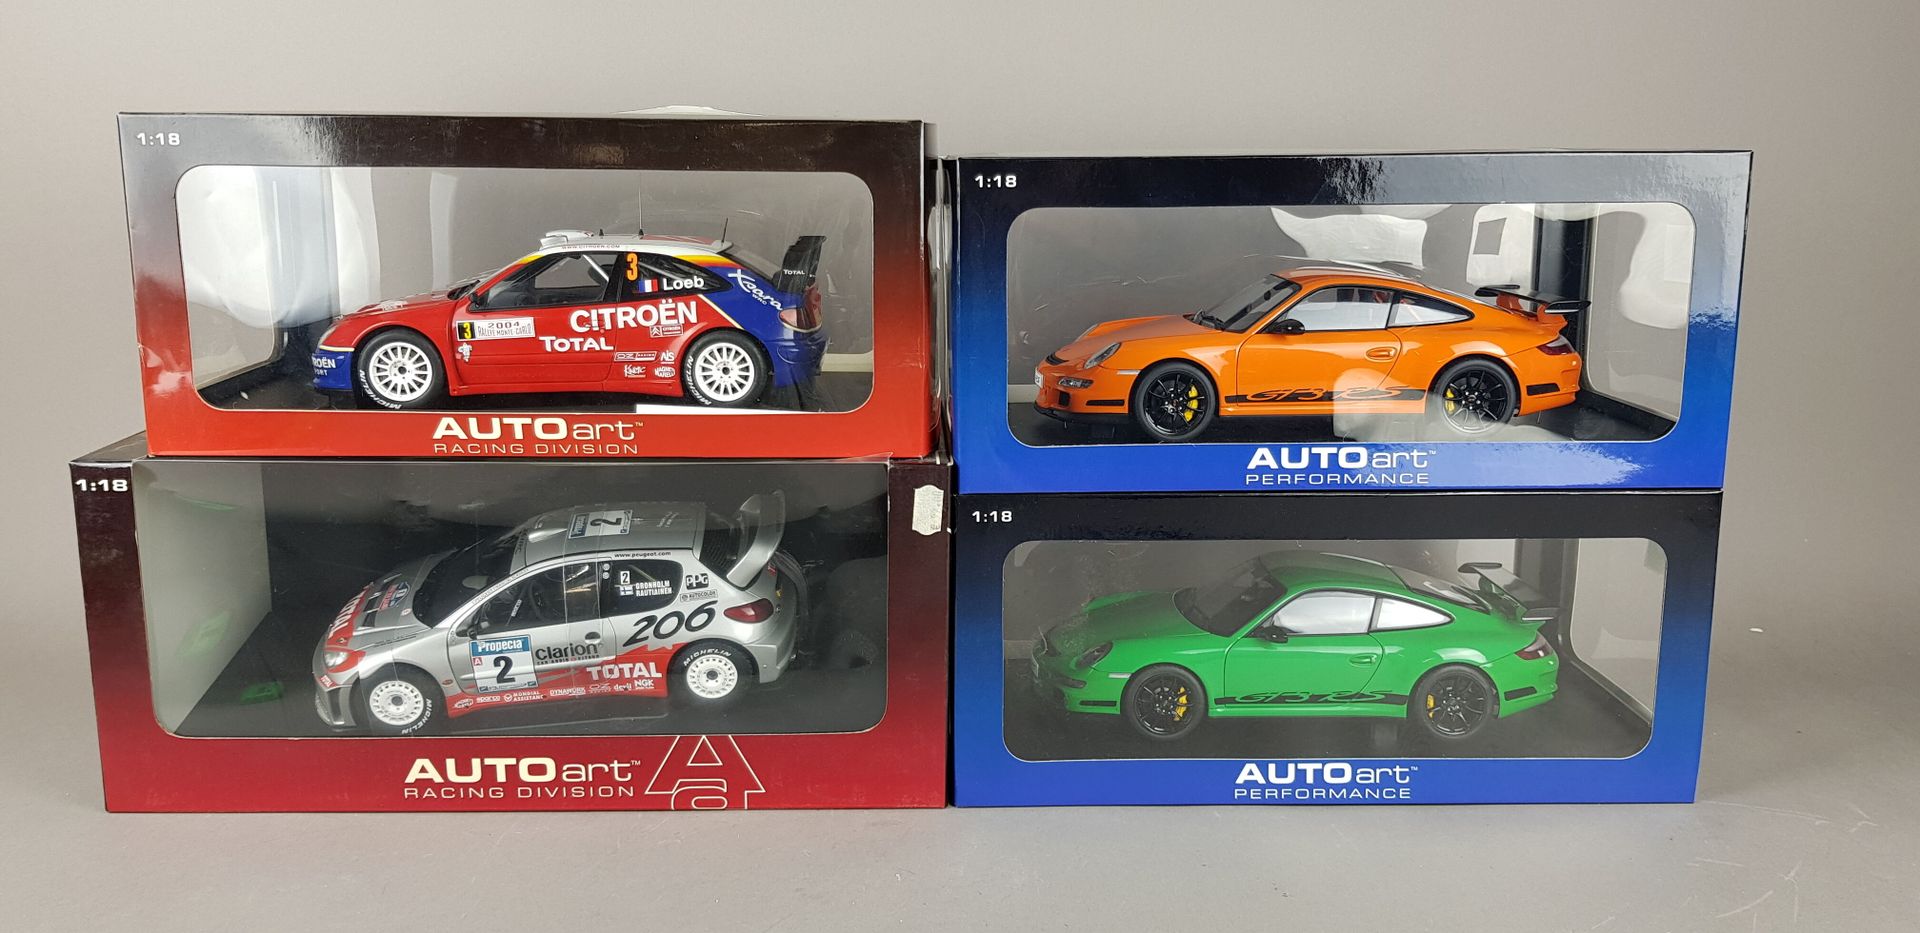 Null AUTO-ART Performance - FOUR cars in 1/18 scale:

2x Porsche 997 GT3 RS (gre&hellip;